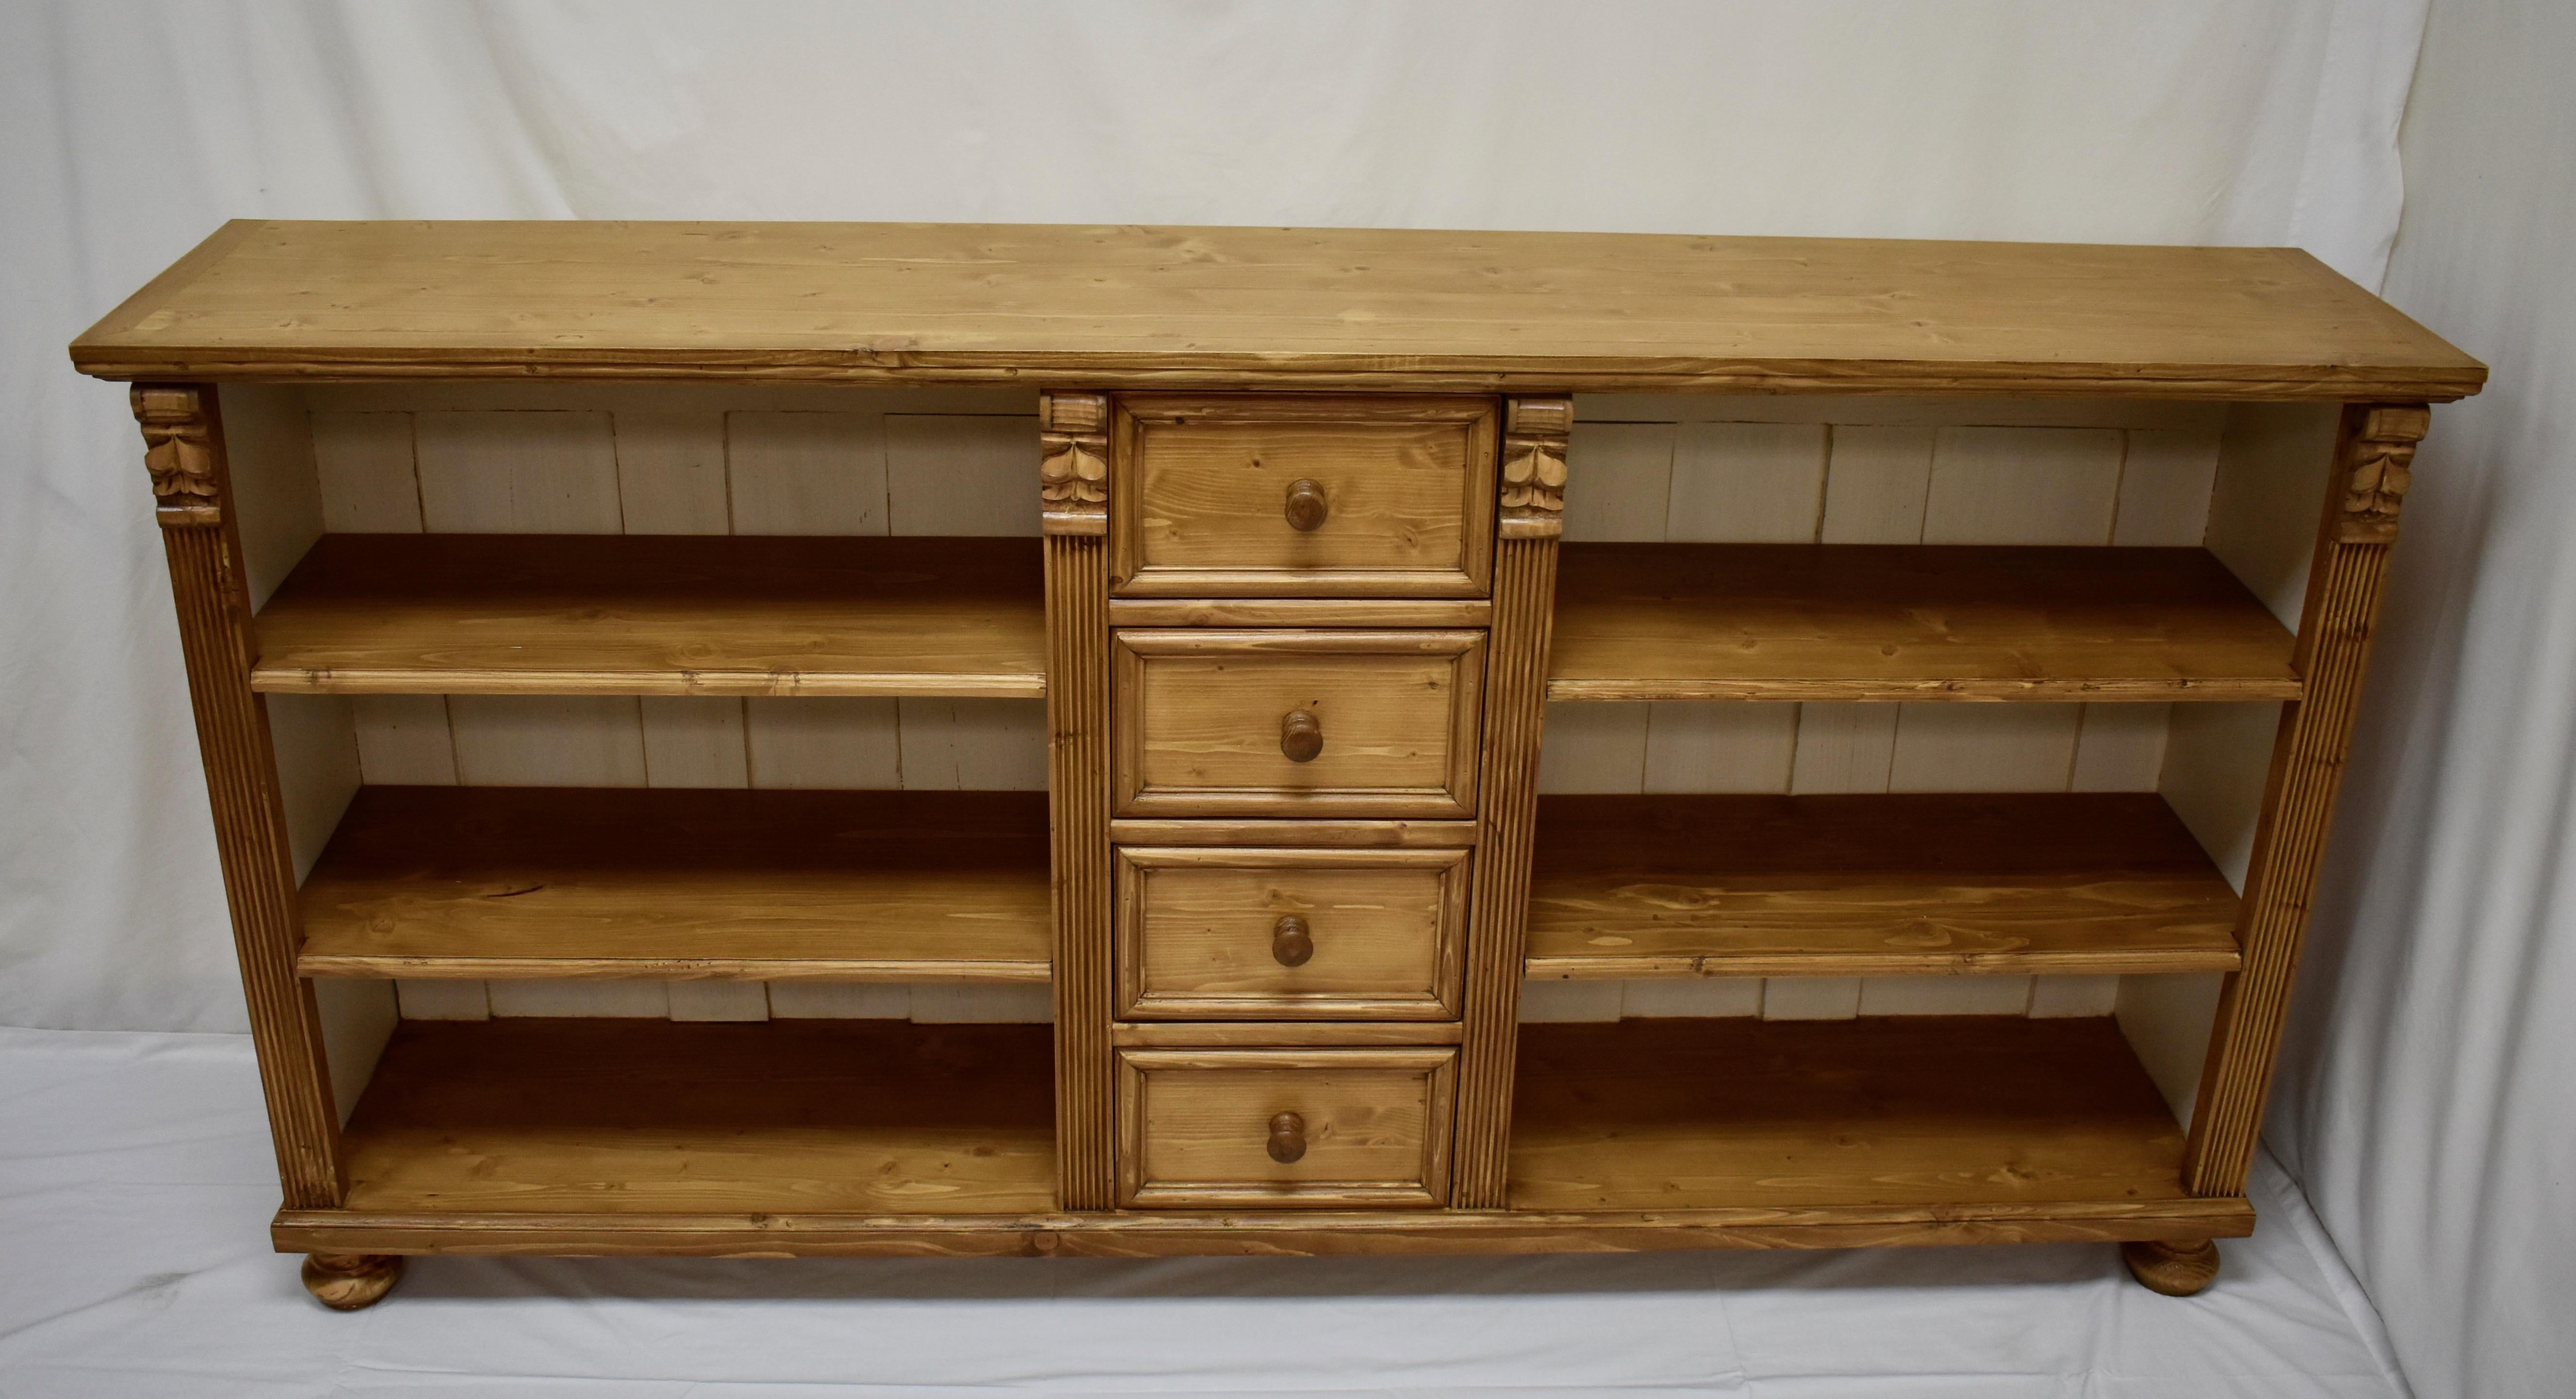 Antique pine bookcases can be hard to find and so can well-made reproductions. Using design features and methods of construction found on our antique pine furniture, our workshop in Europe takes lightly-used reclaimed pine and fashions our